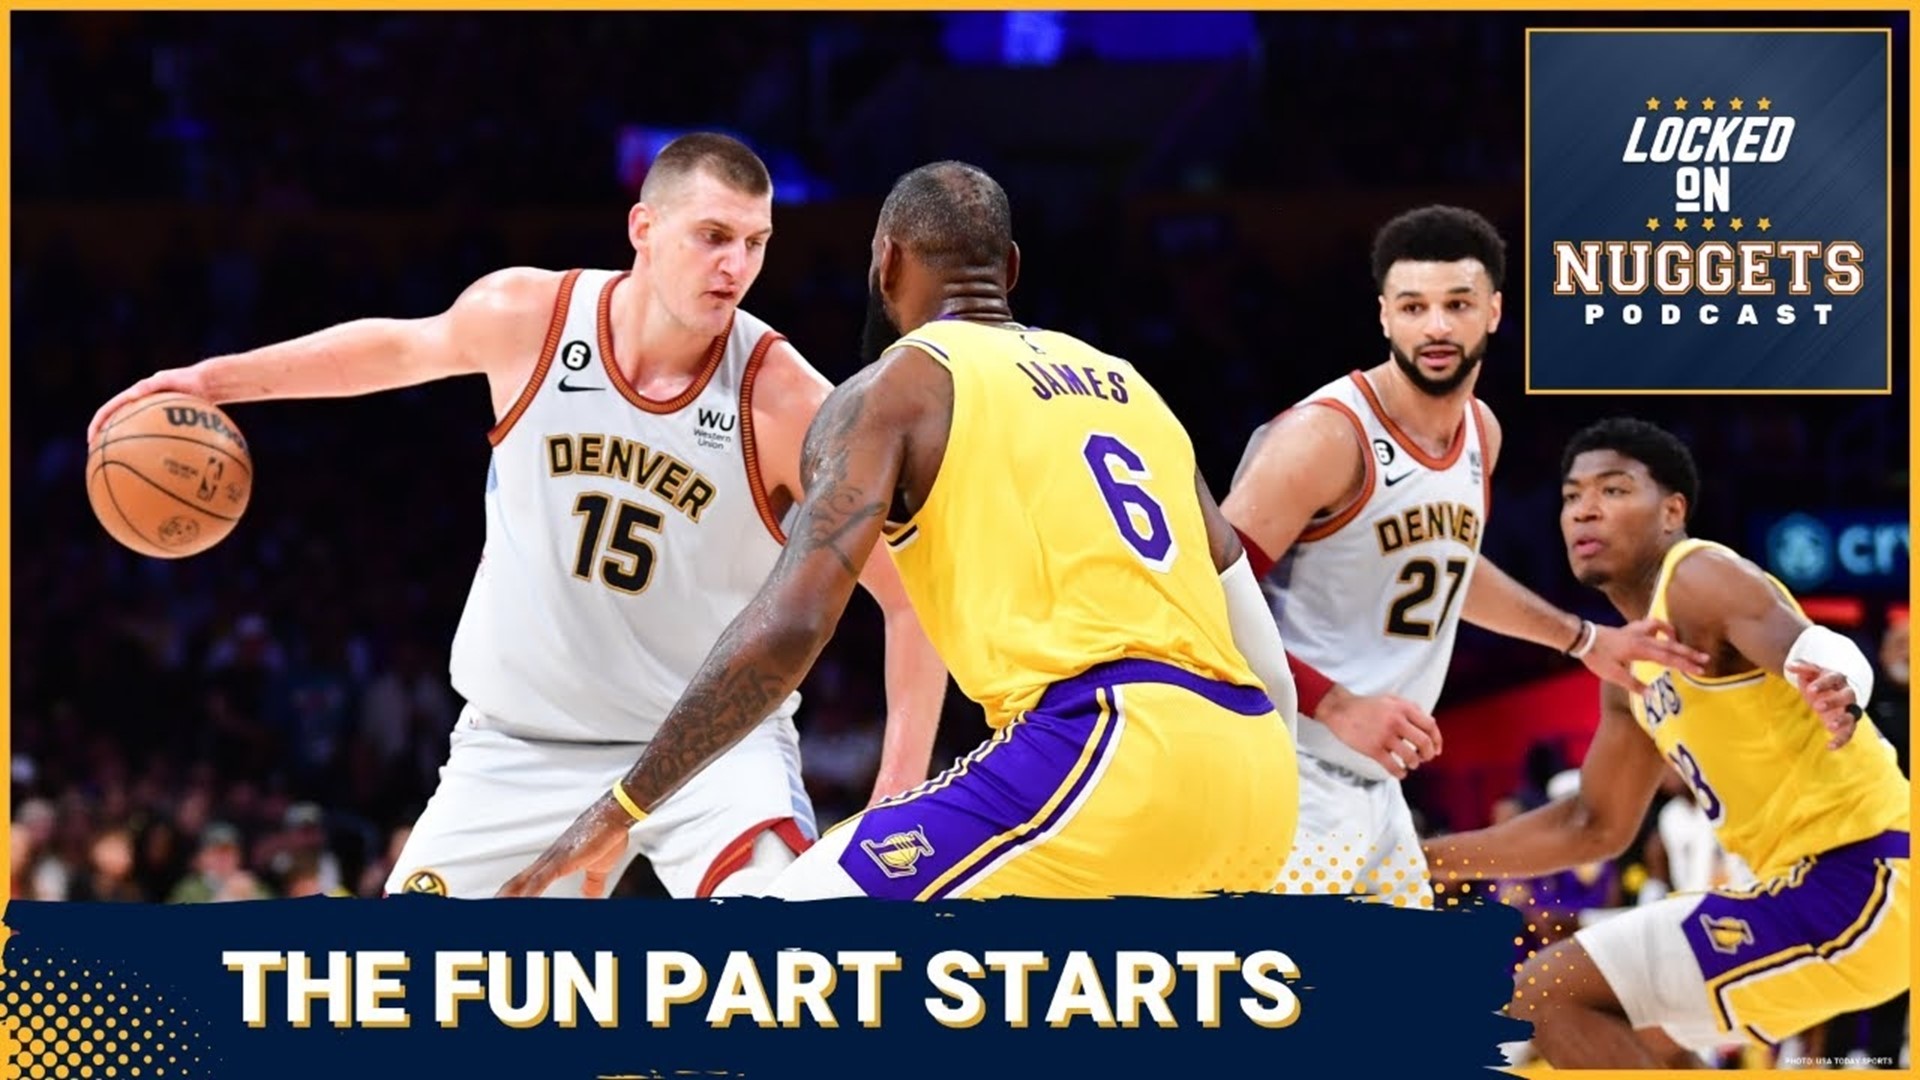 The Denver Nuggets are officially playing the LA Lakers in Round One! Let’s talk about that early matchup and what to look for!